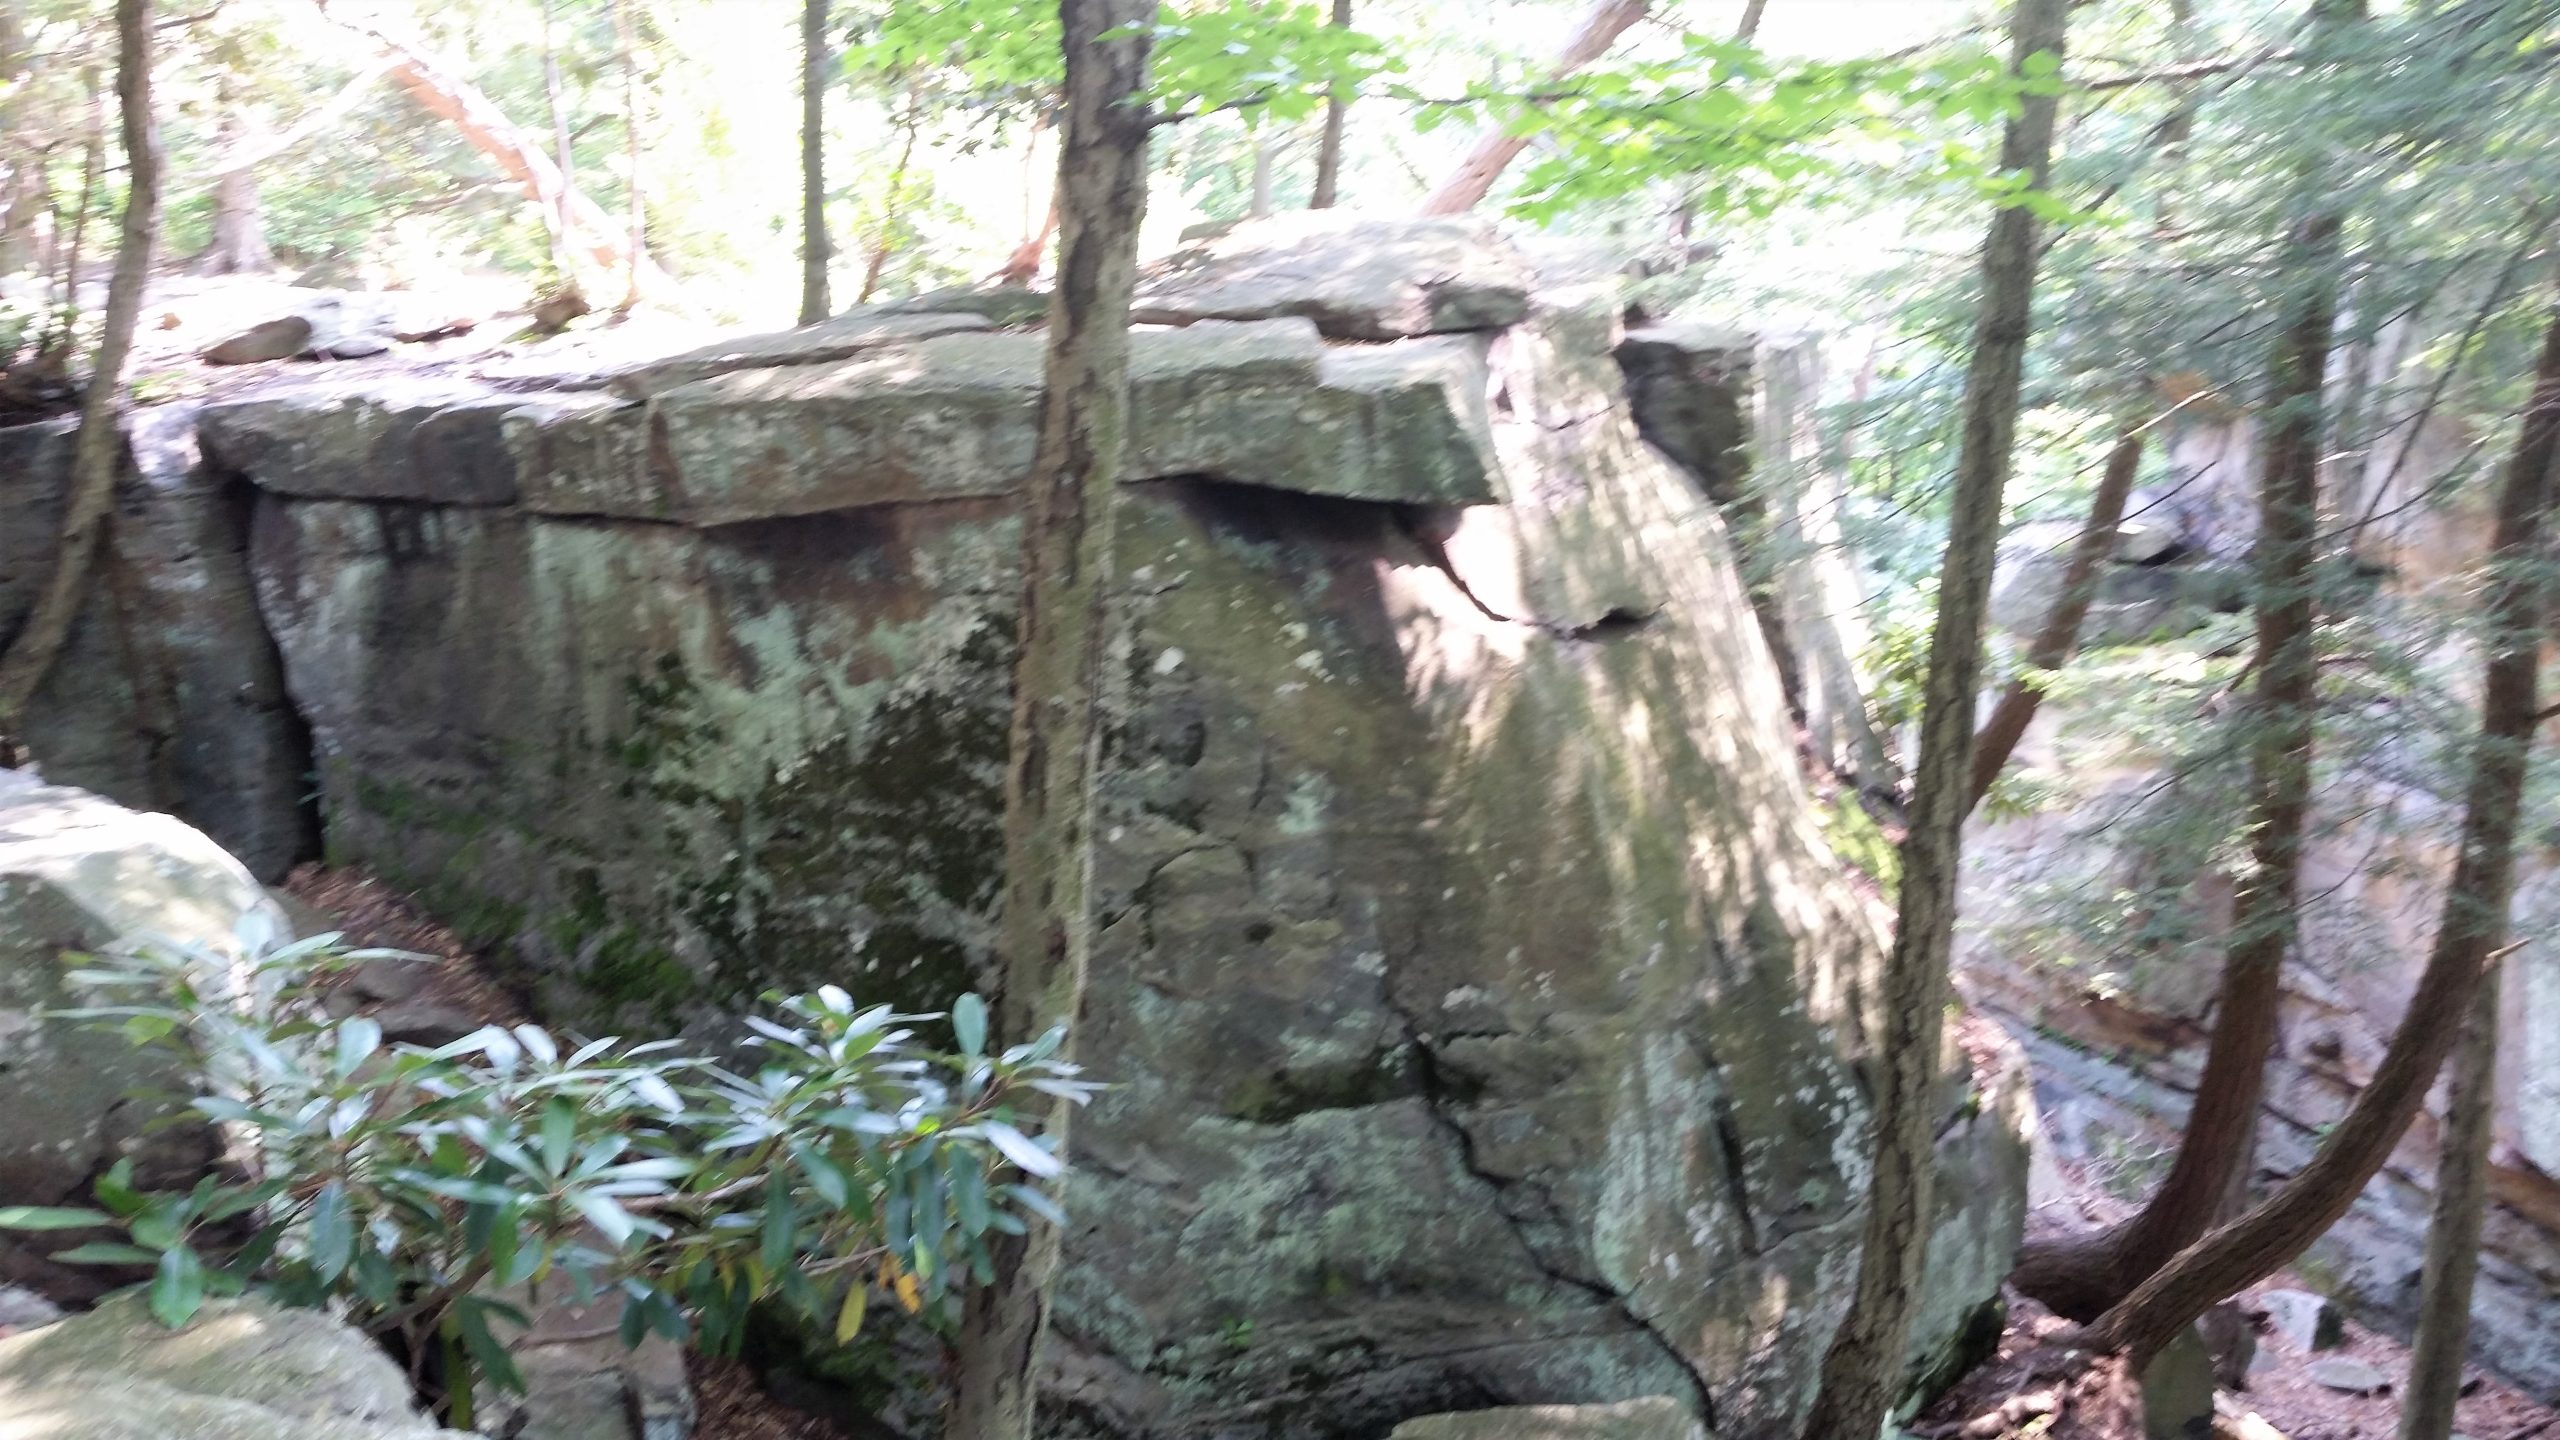 A view of a large rock formation near the top of the overlook.